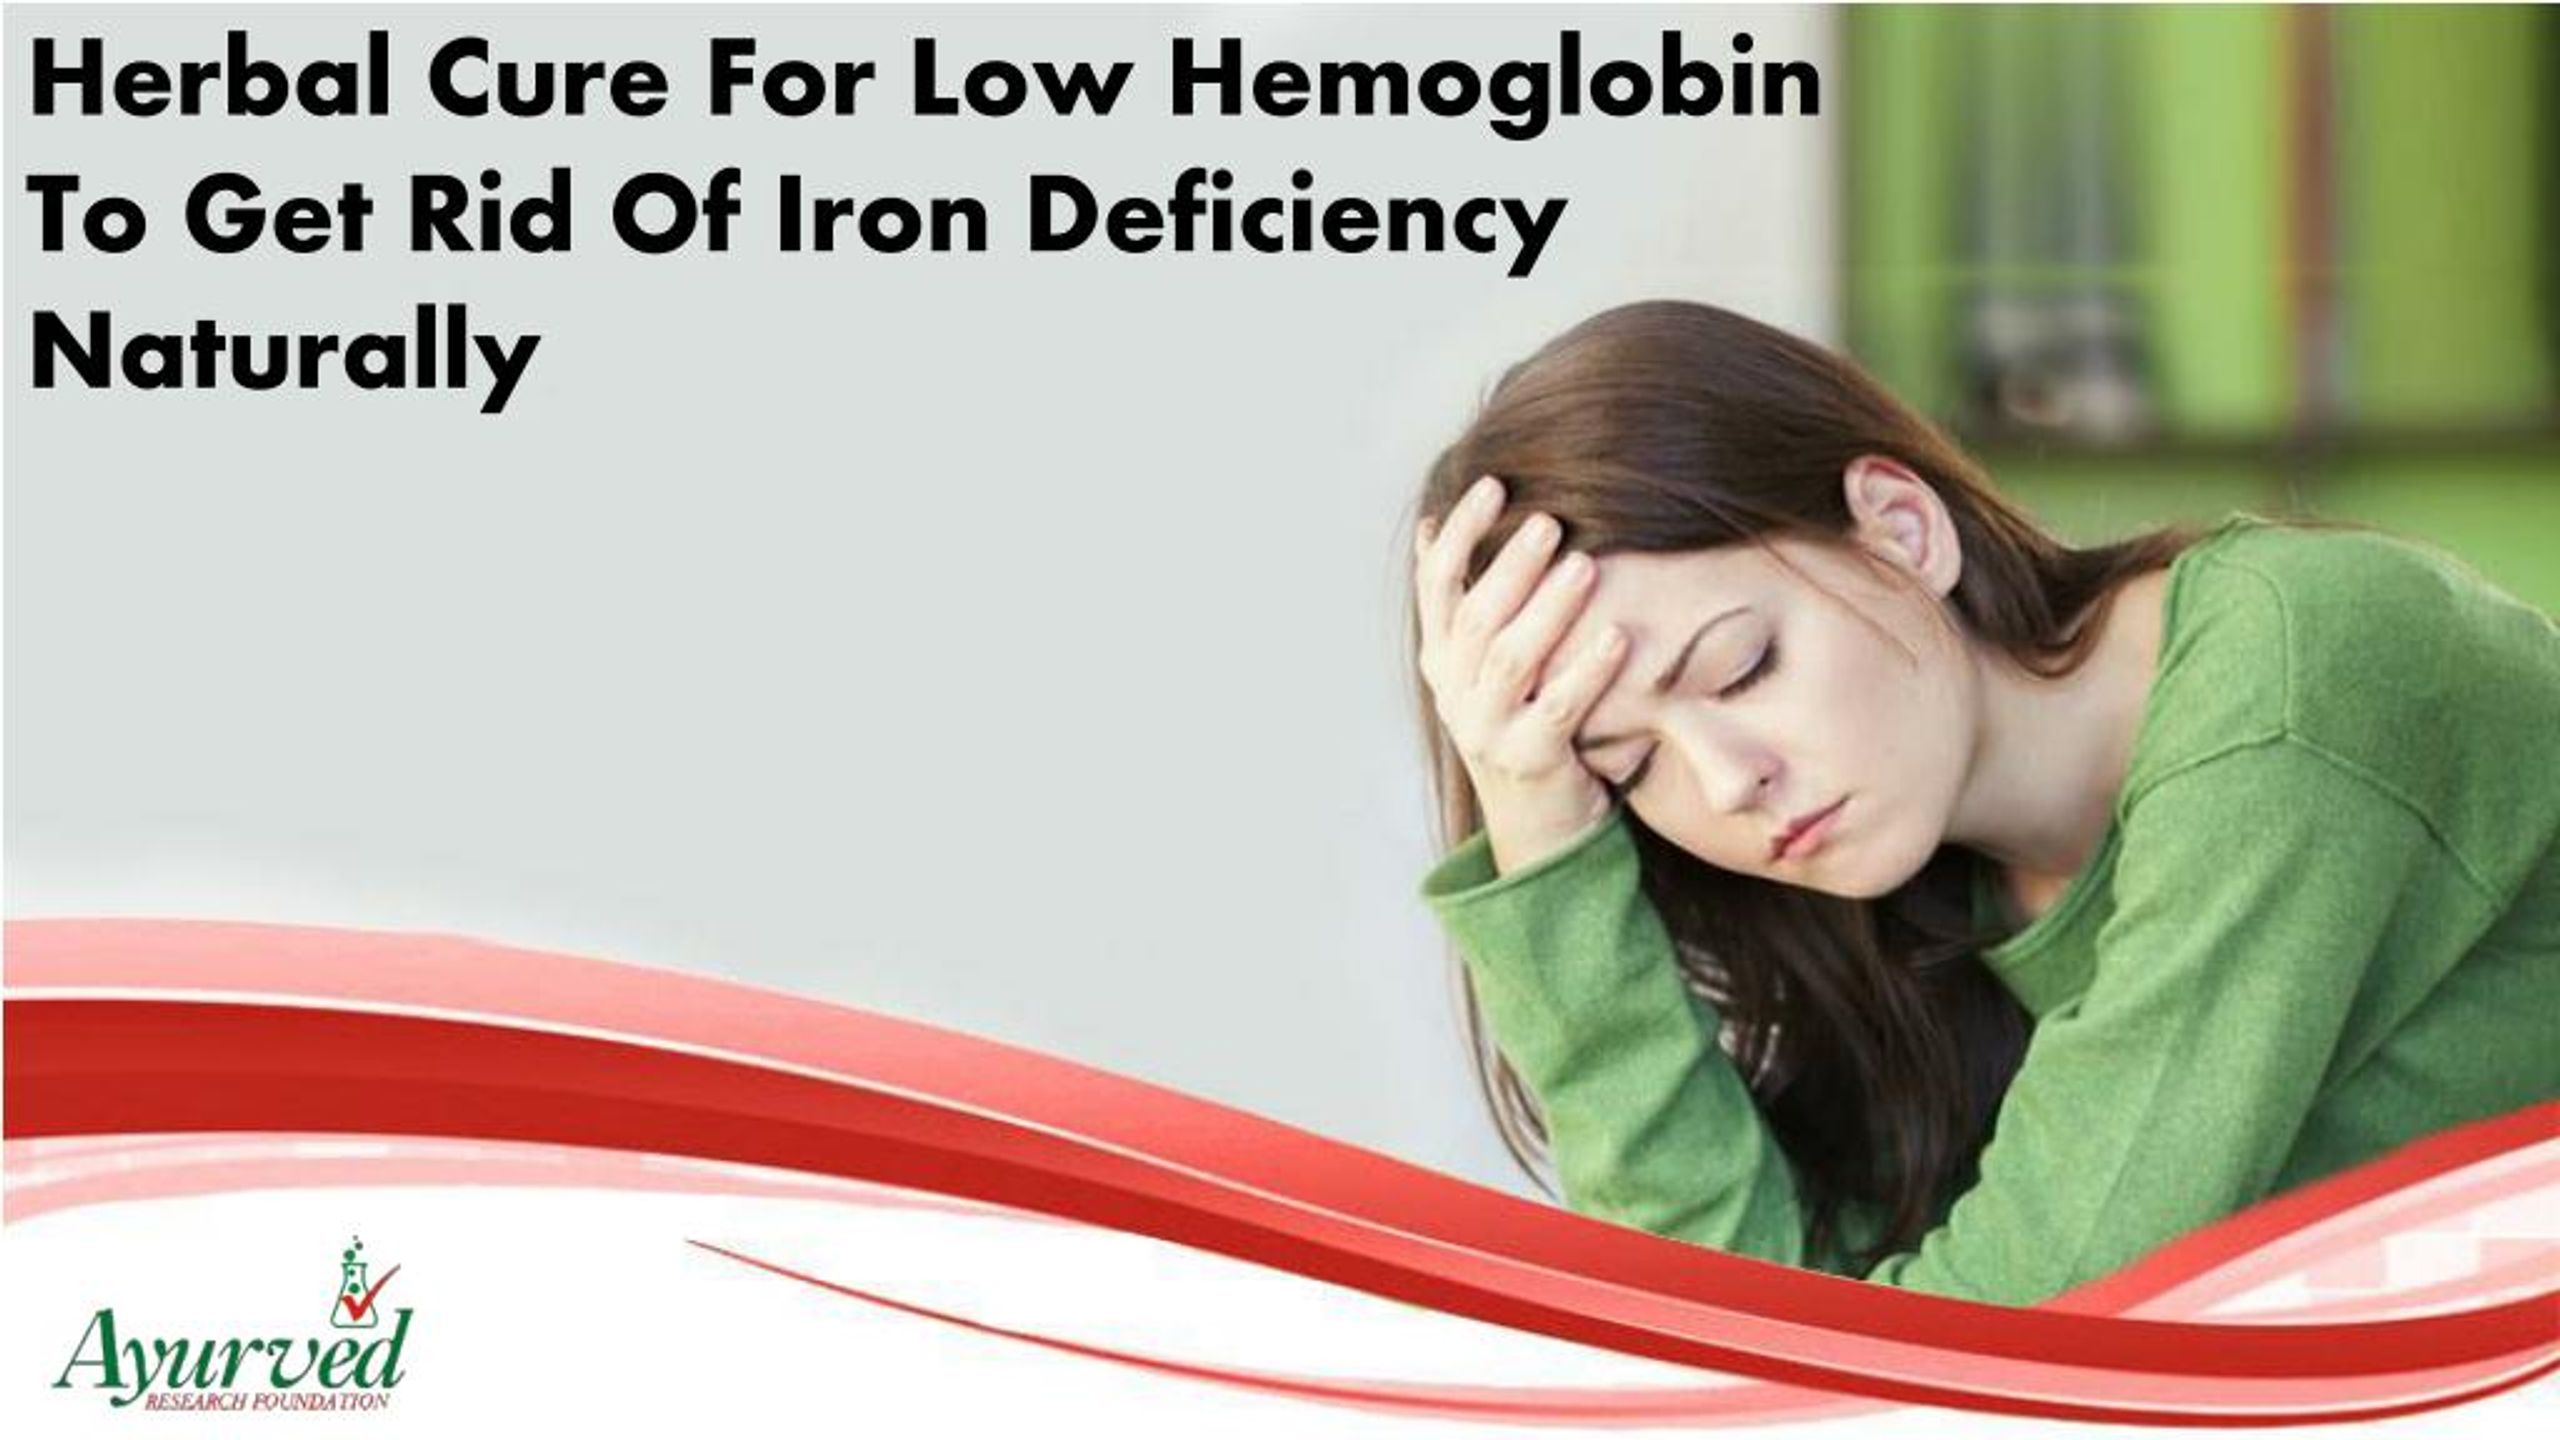 Ppt Herbal Cure For Low Hemoglobin To Get Rid Of Iron Deficiency